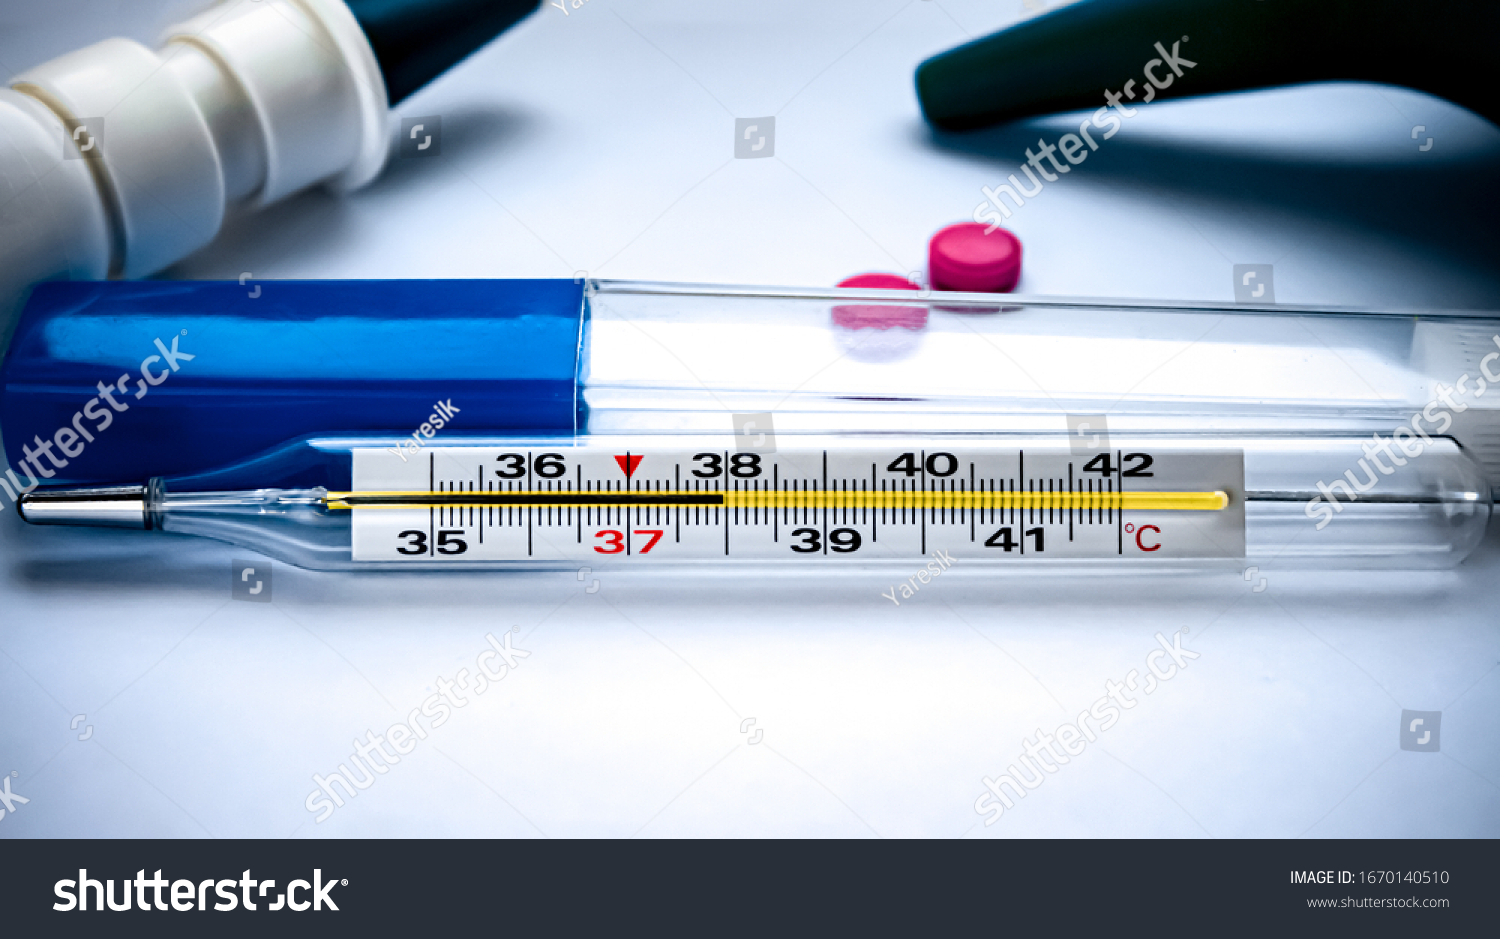 Thermometer which shows high
temperature on the background of tablets and potions. #1670140510